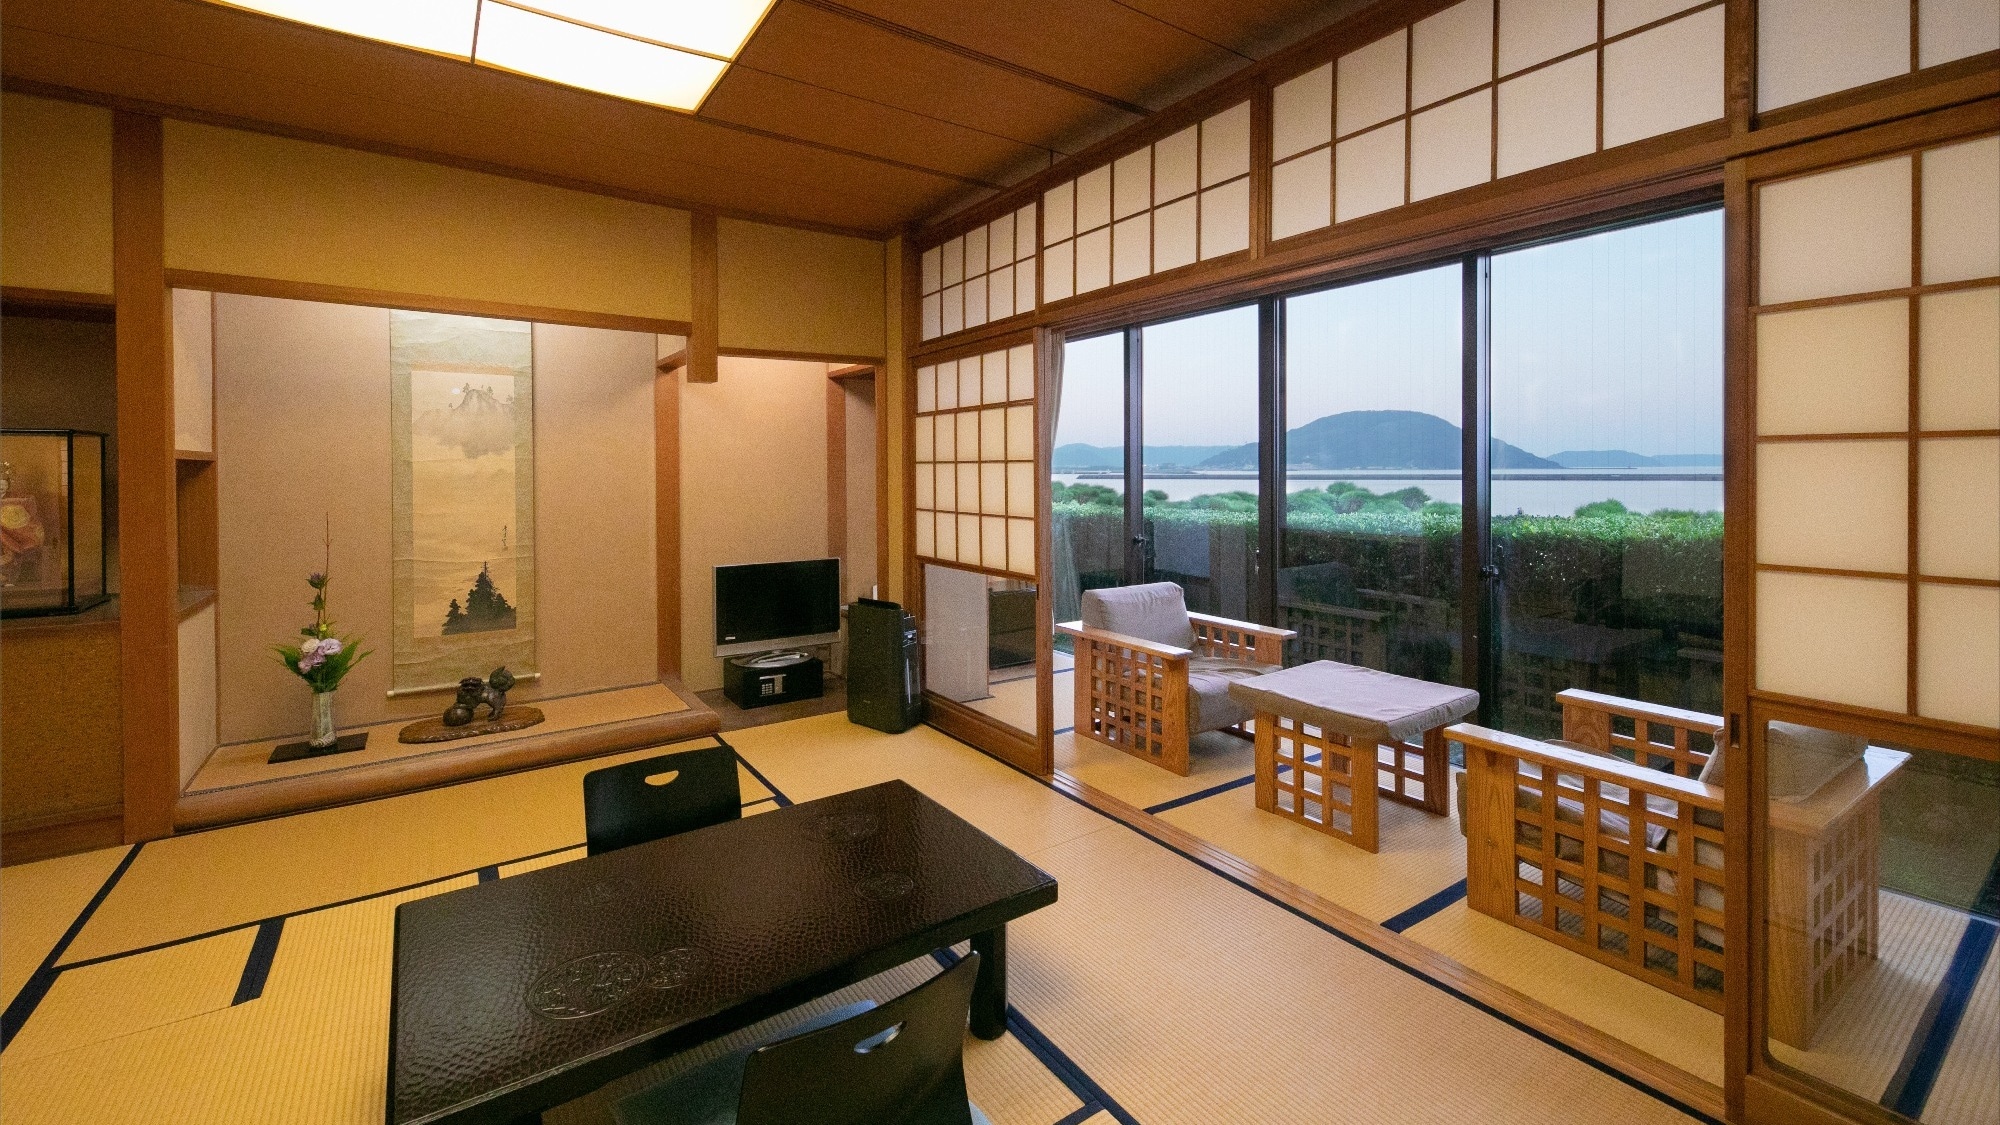 [10 tatami mats/Ume no Ma] The beautiful scenery of Karatsu spreads out in front of you.